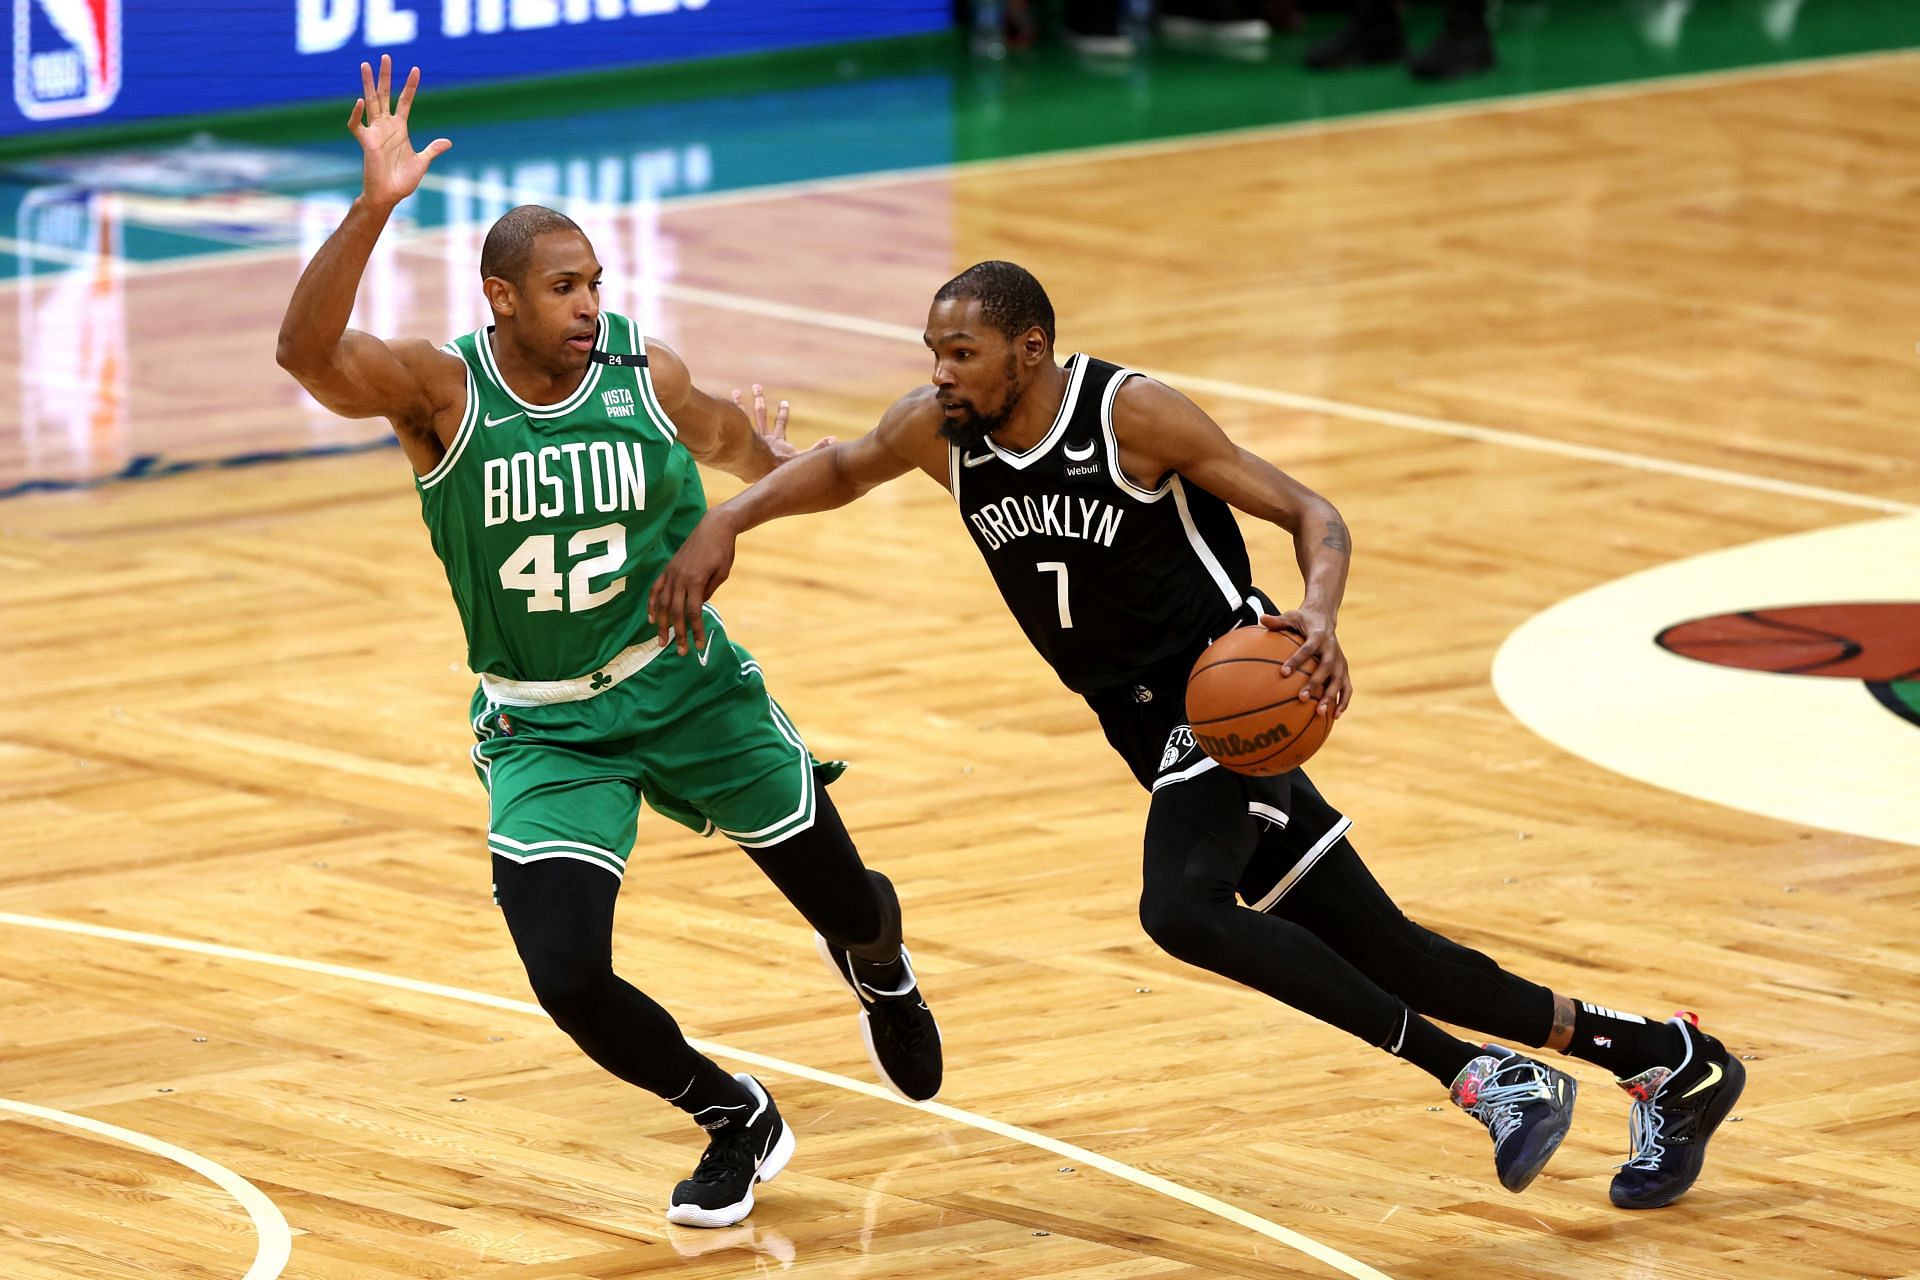 Kevin Durant of the Brooklyn Nets drives towards the basket against Al Horford of the Boston Celtics.